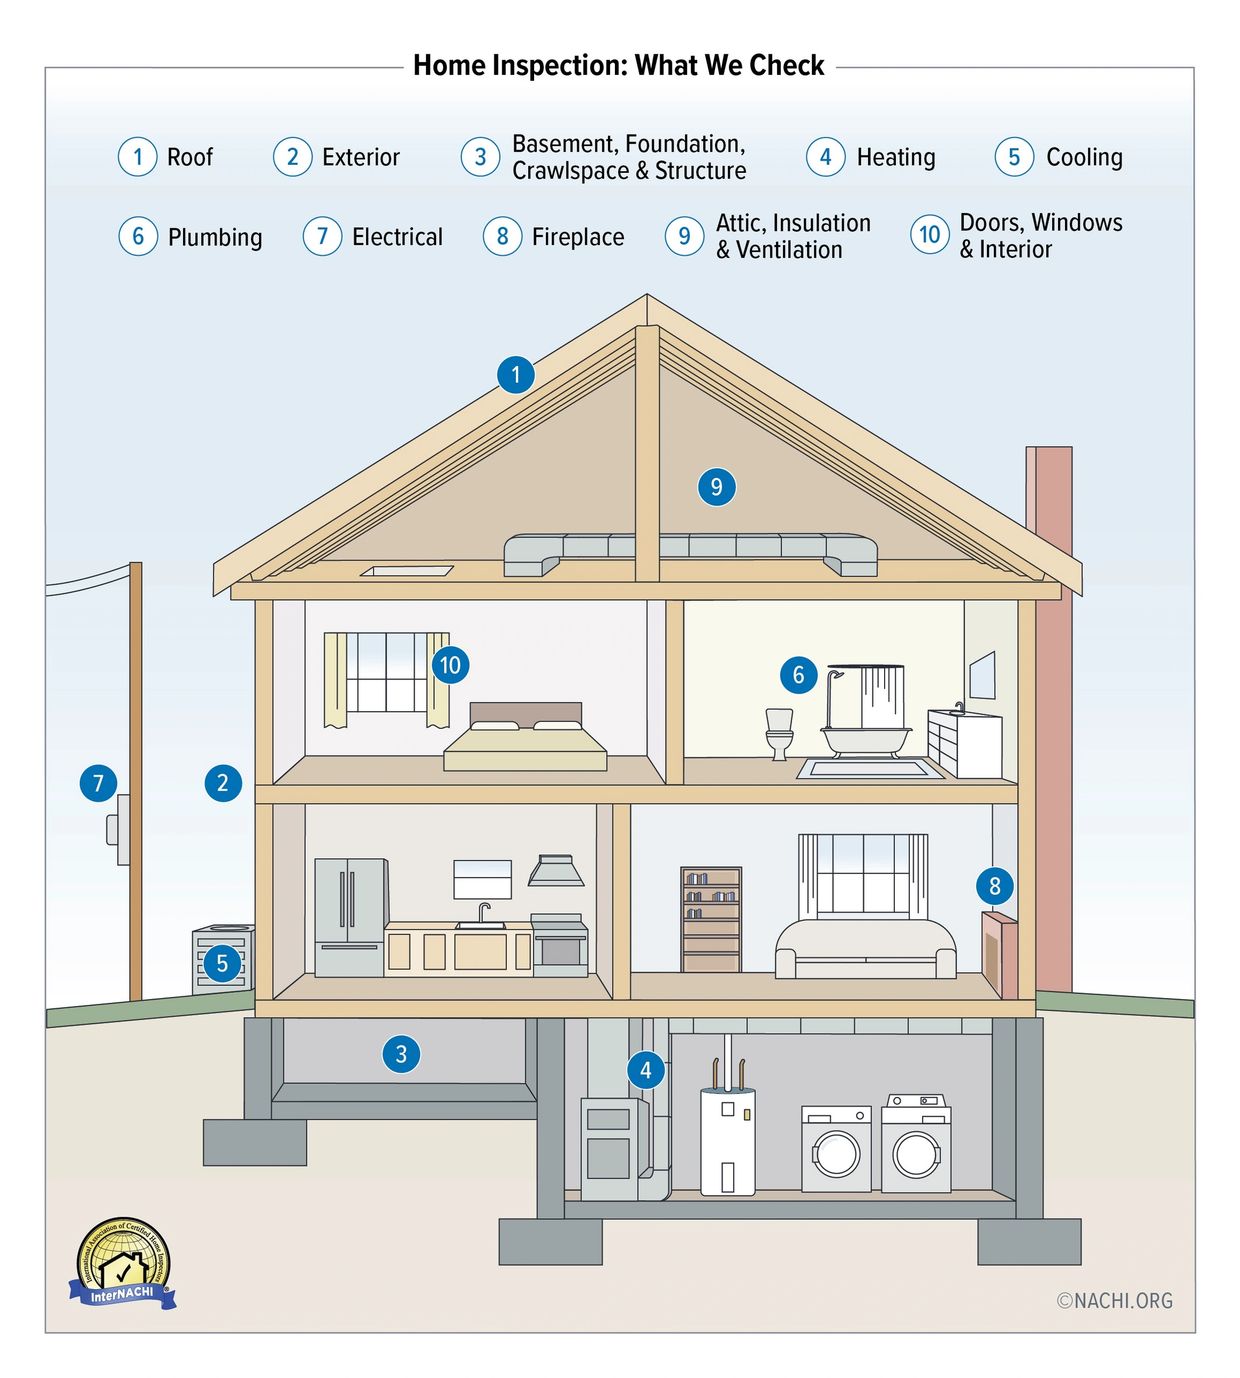 InterNACHI Home Inspection: What We Check